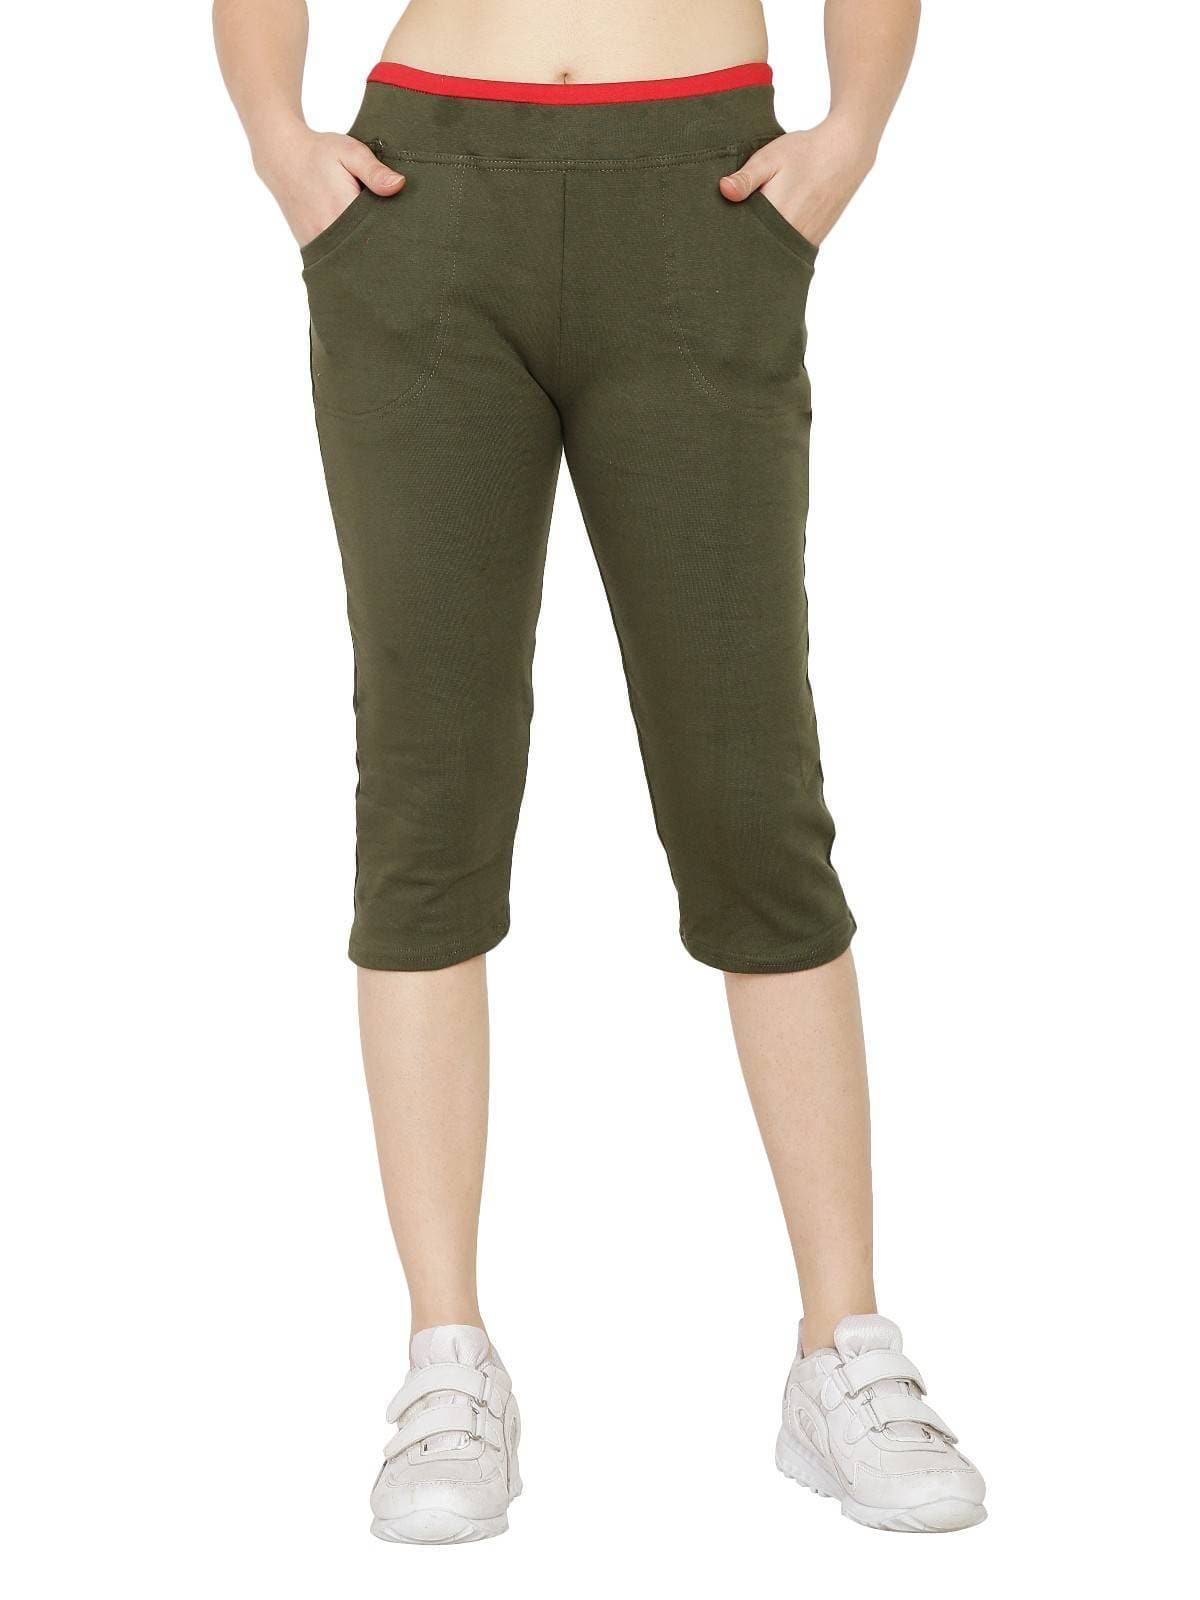 Asmaani Olive Green Color Capri Type with Two Side Pockets.